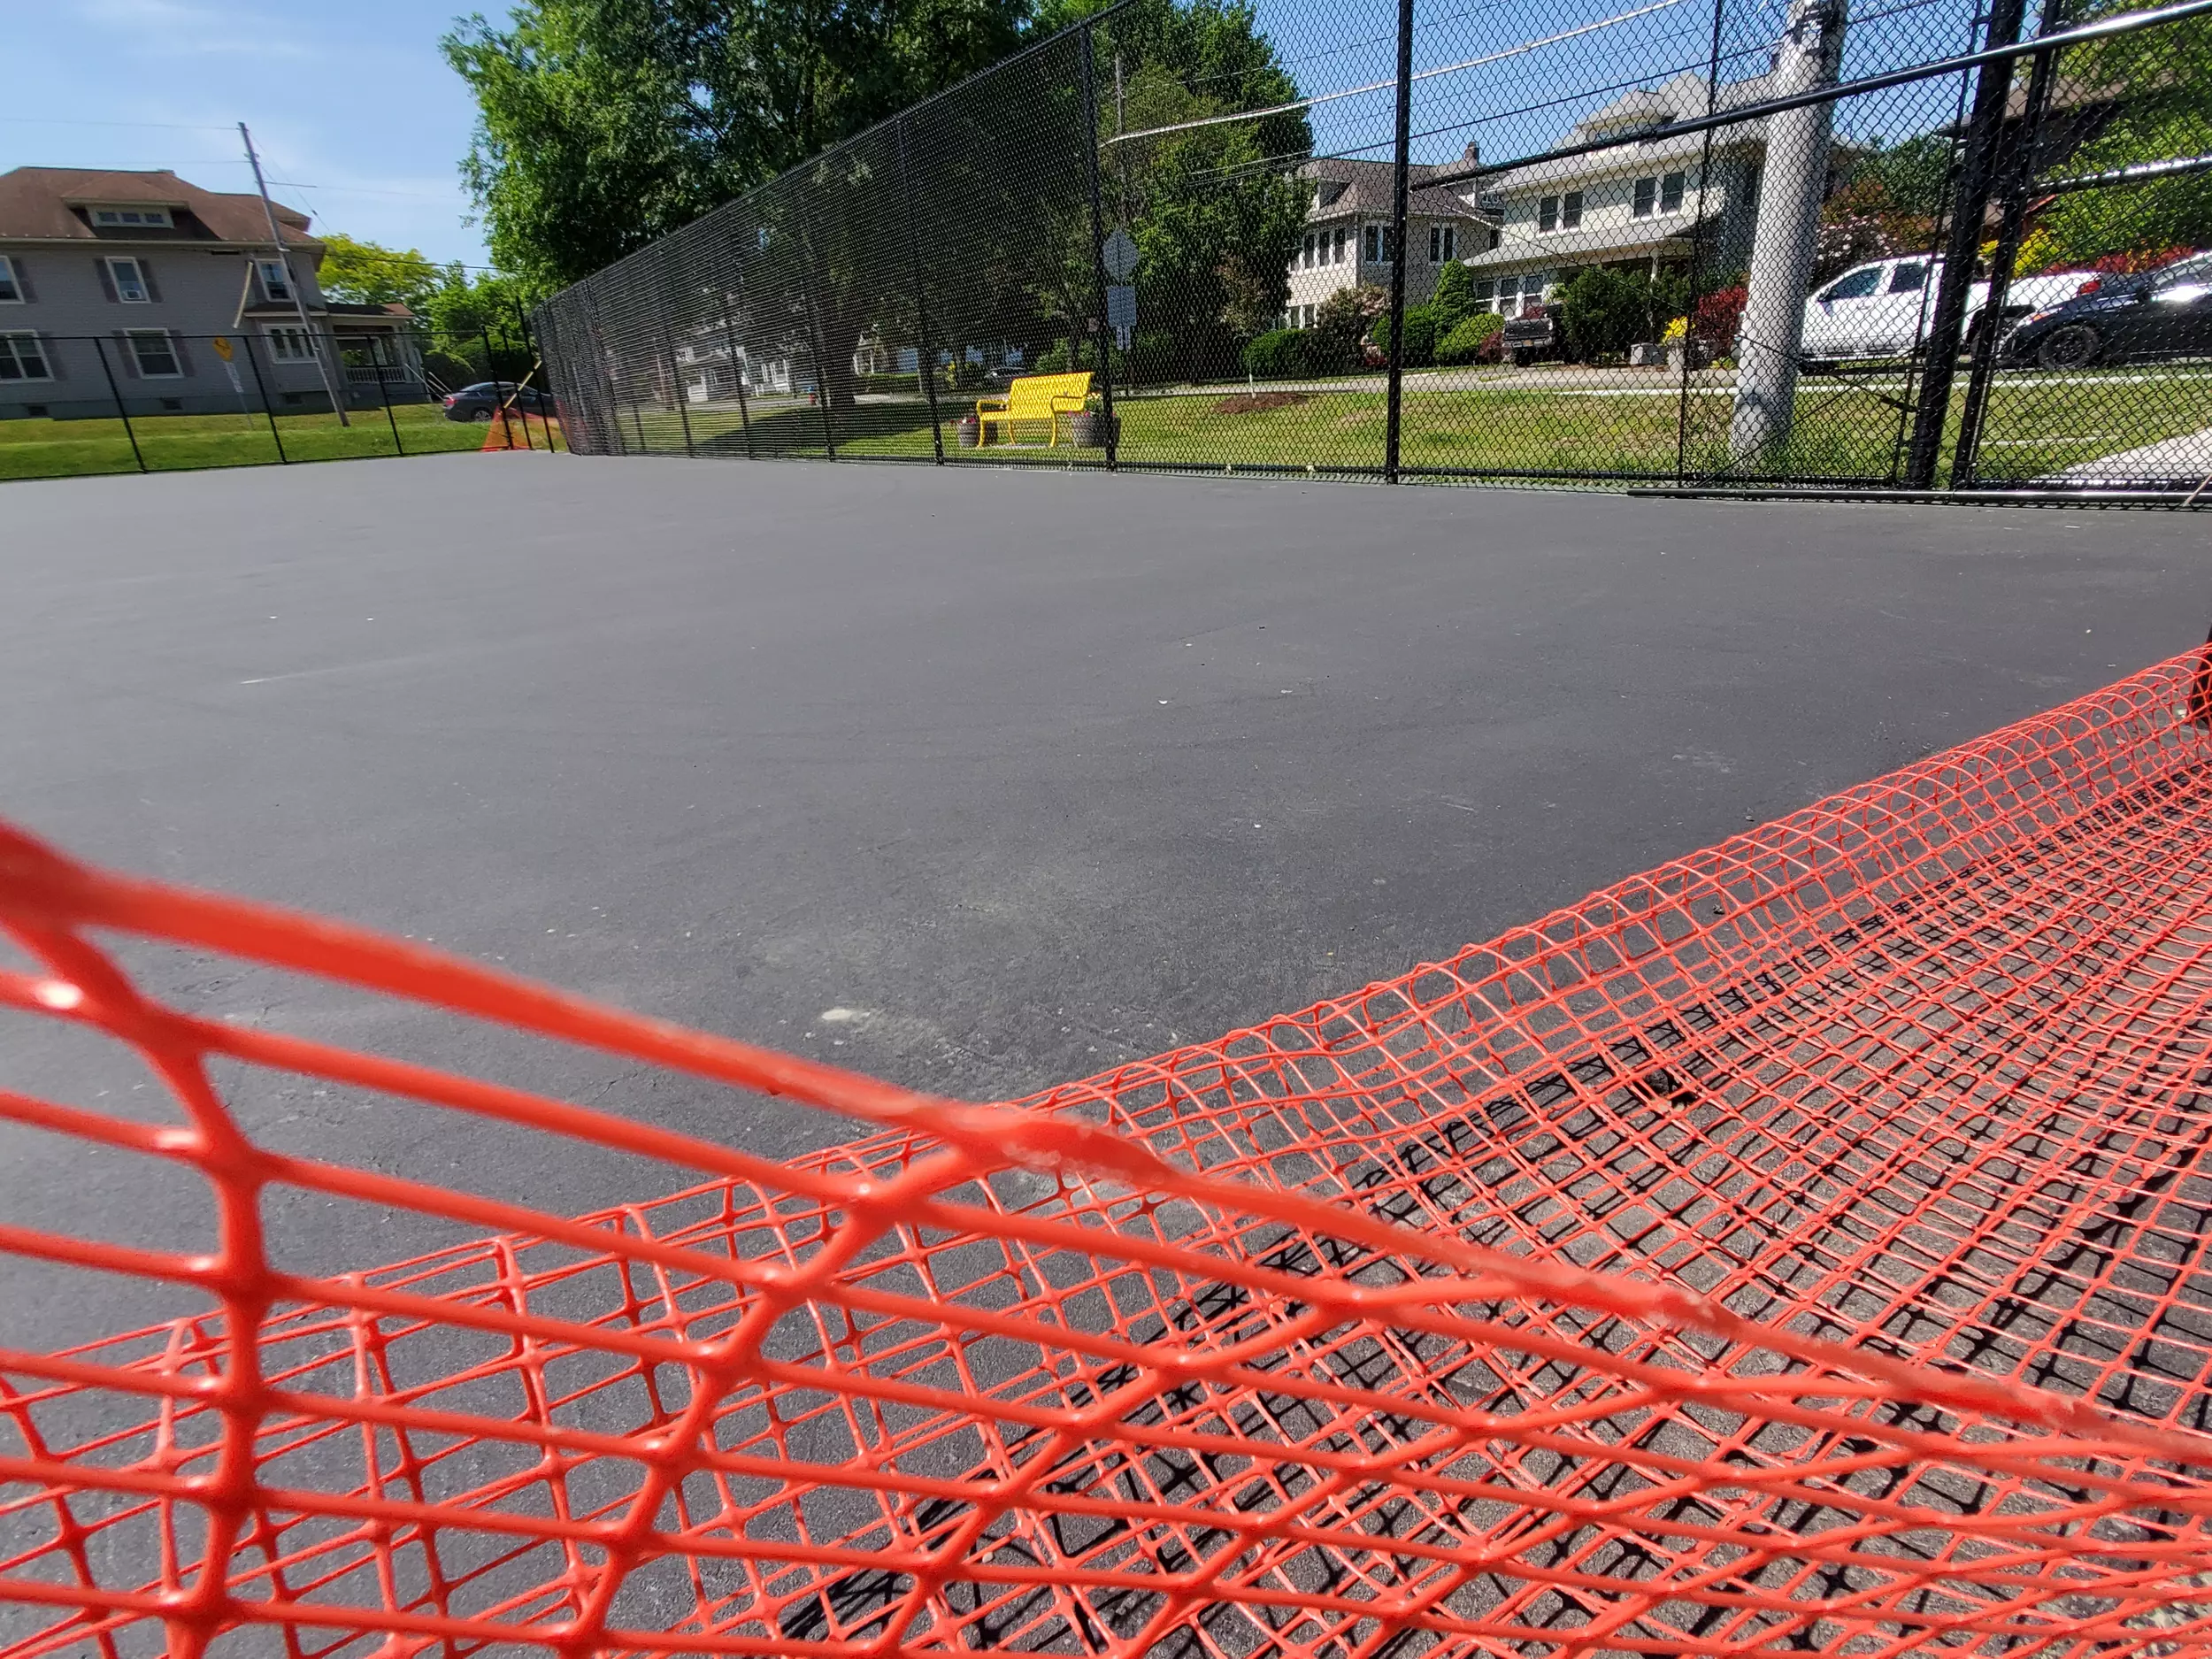 Mysterious Problems Keep Gates Locked at Rec Park Tennis Courts